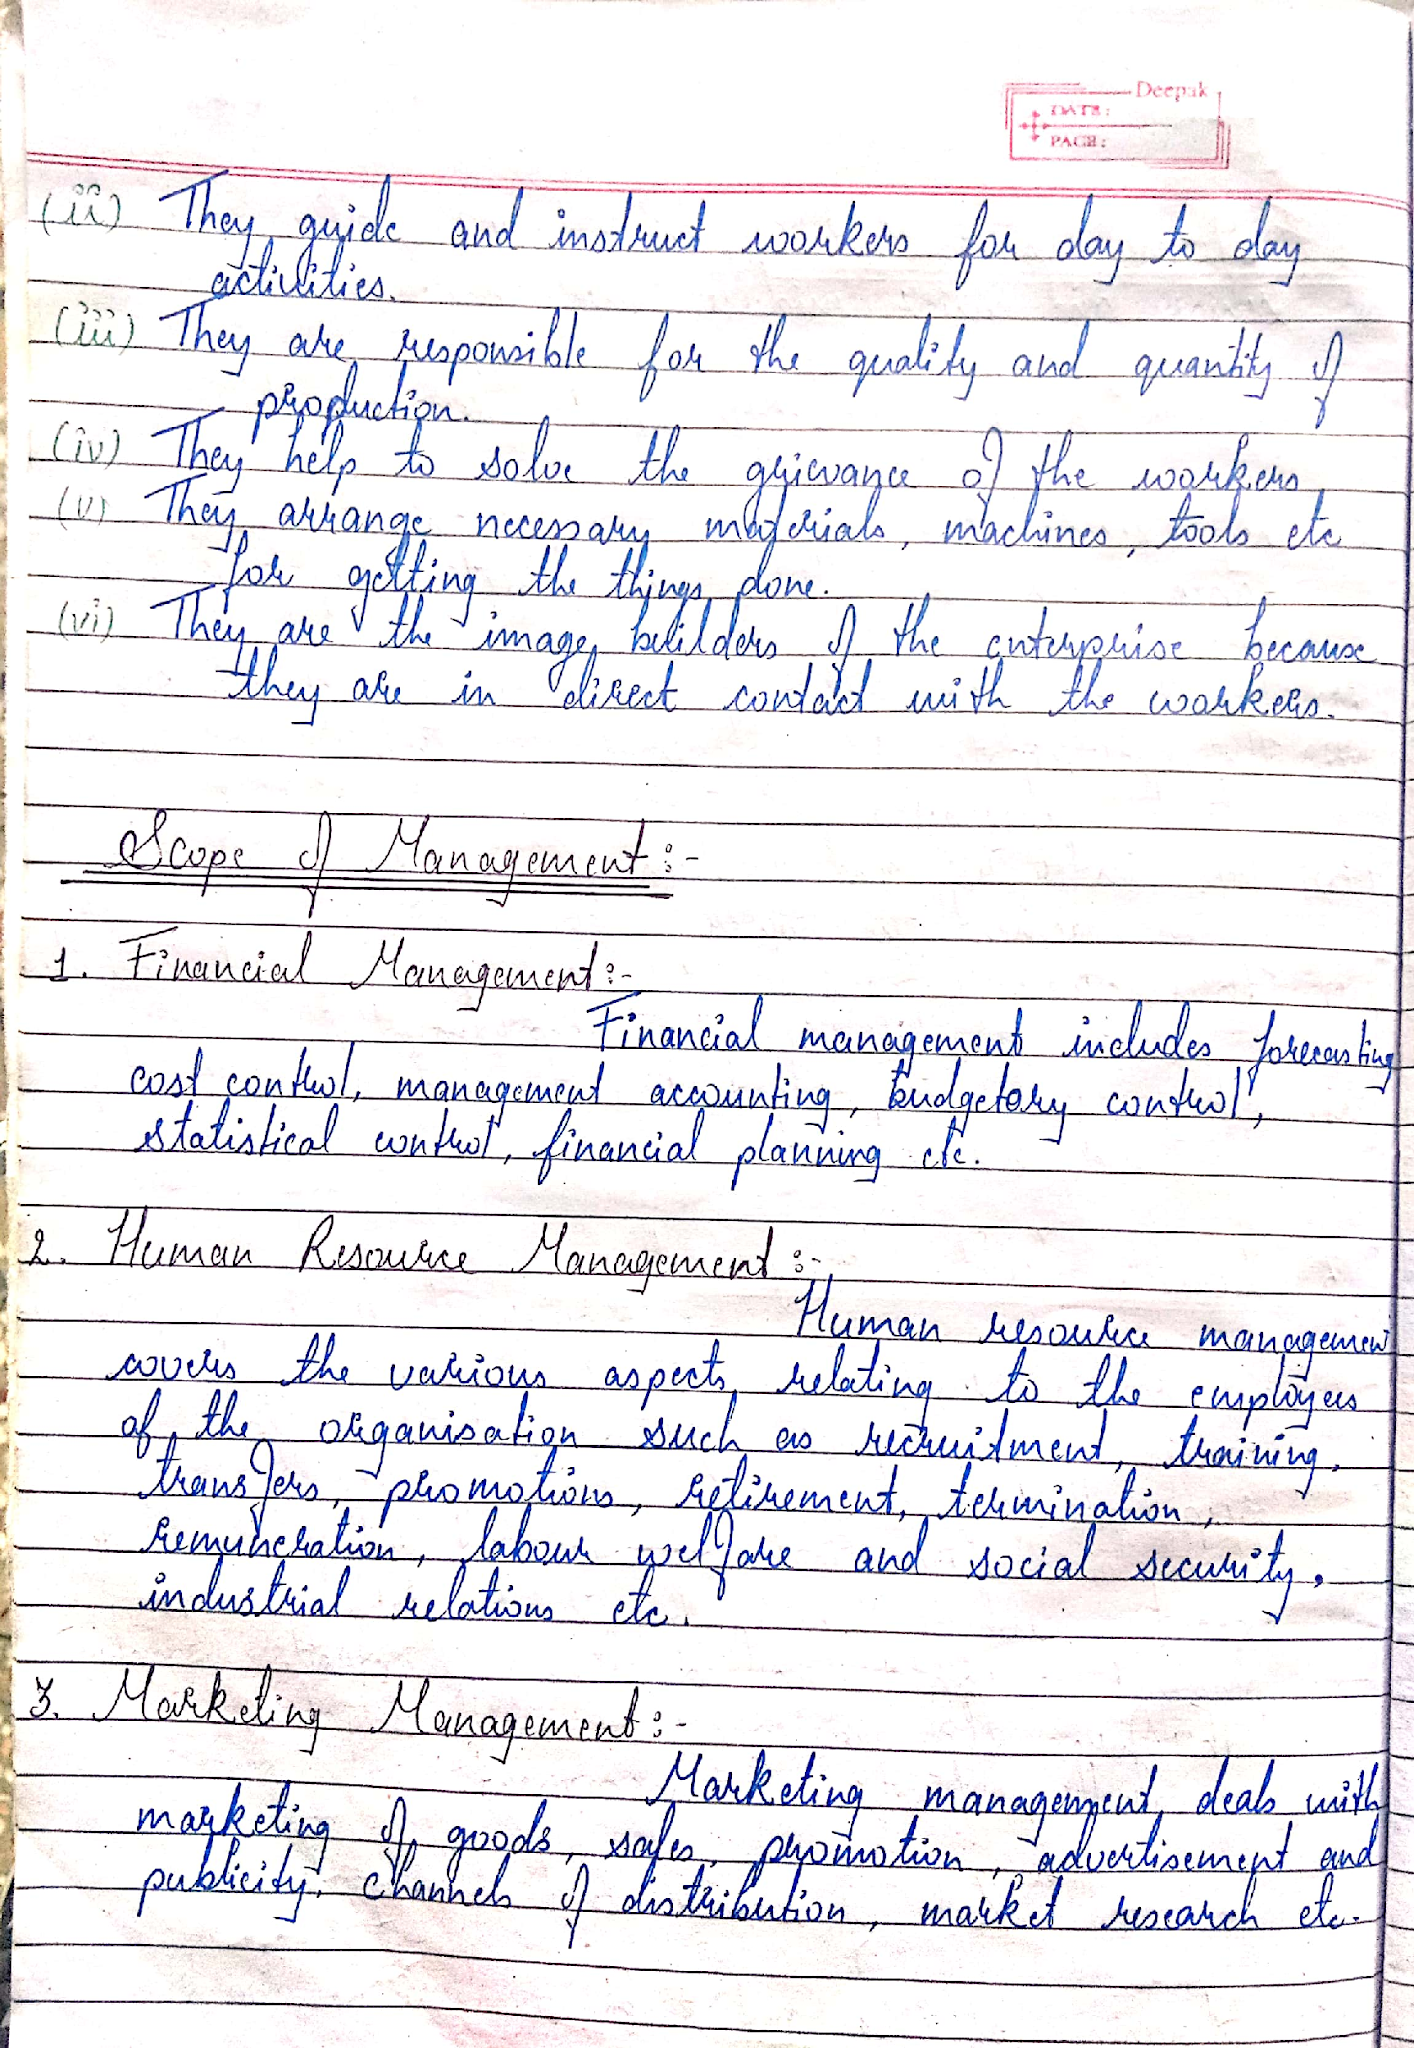 Principles of management handwritten notes images | pom